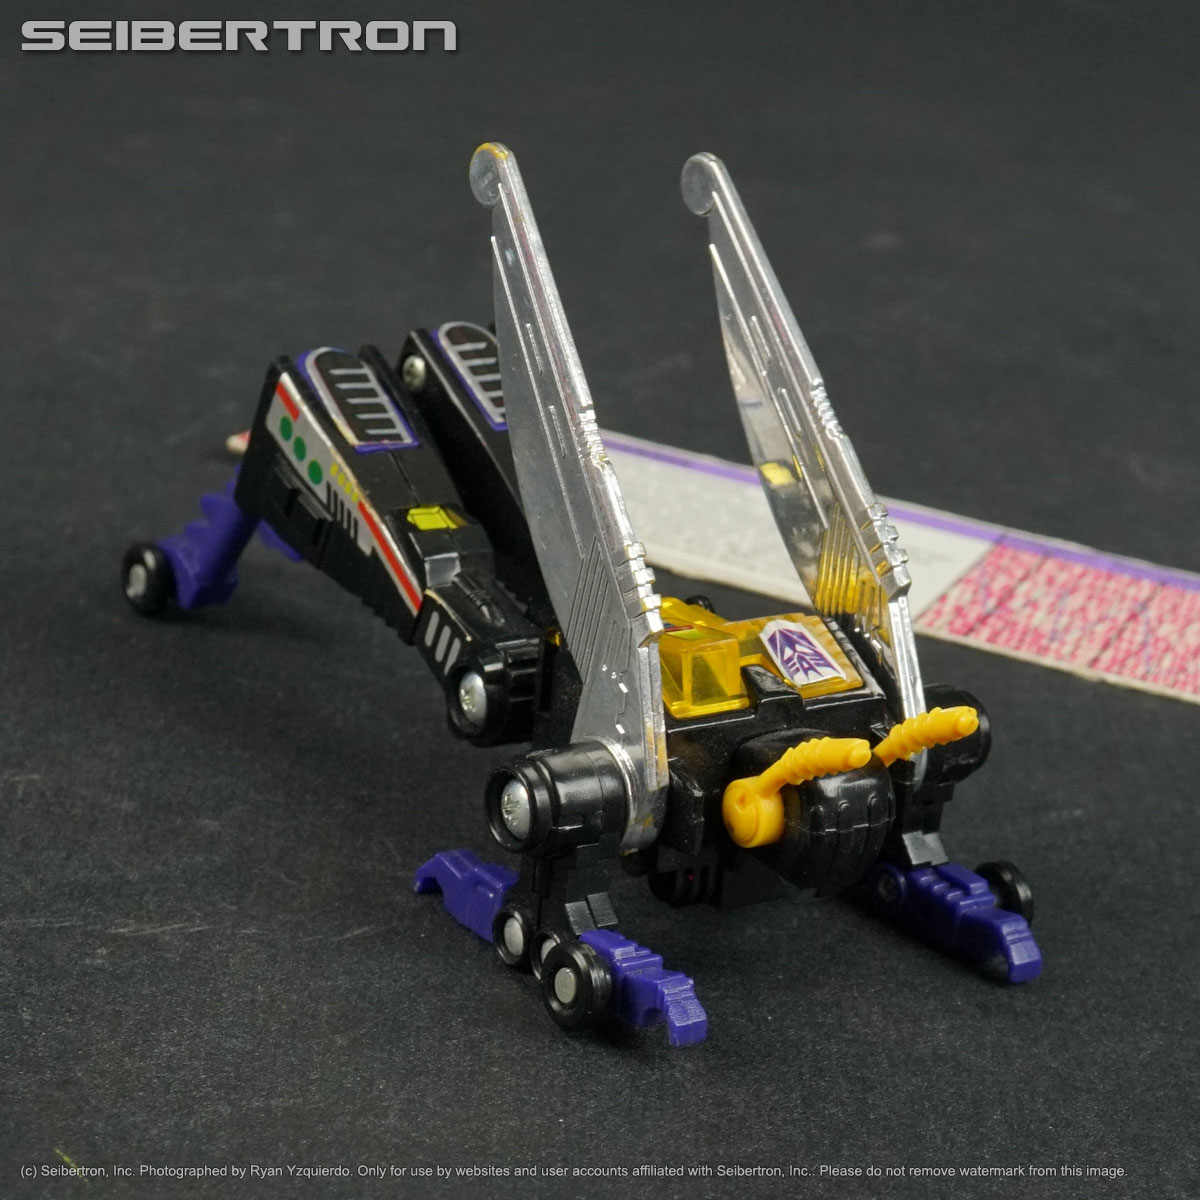 KICKBACK Transformers G1 Insecticons complete + tech specs Hasbro 1985 221122A